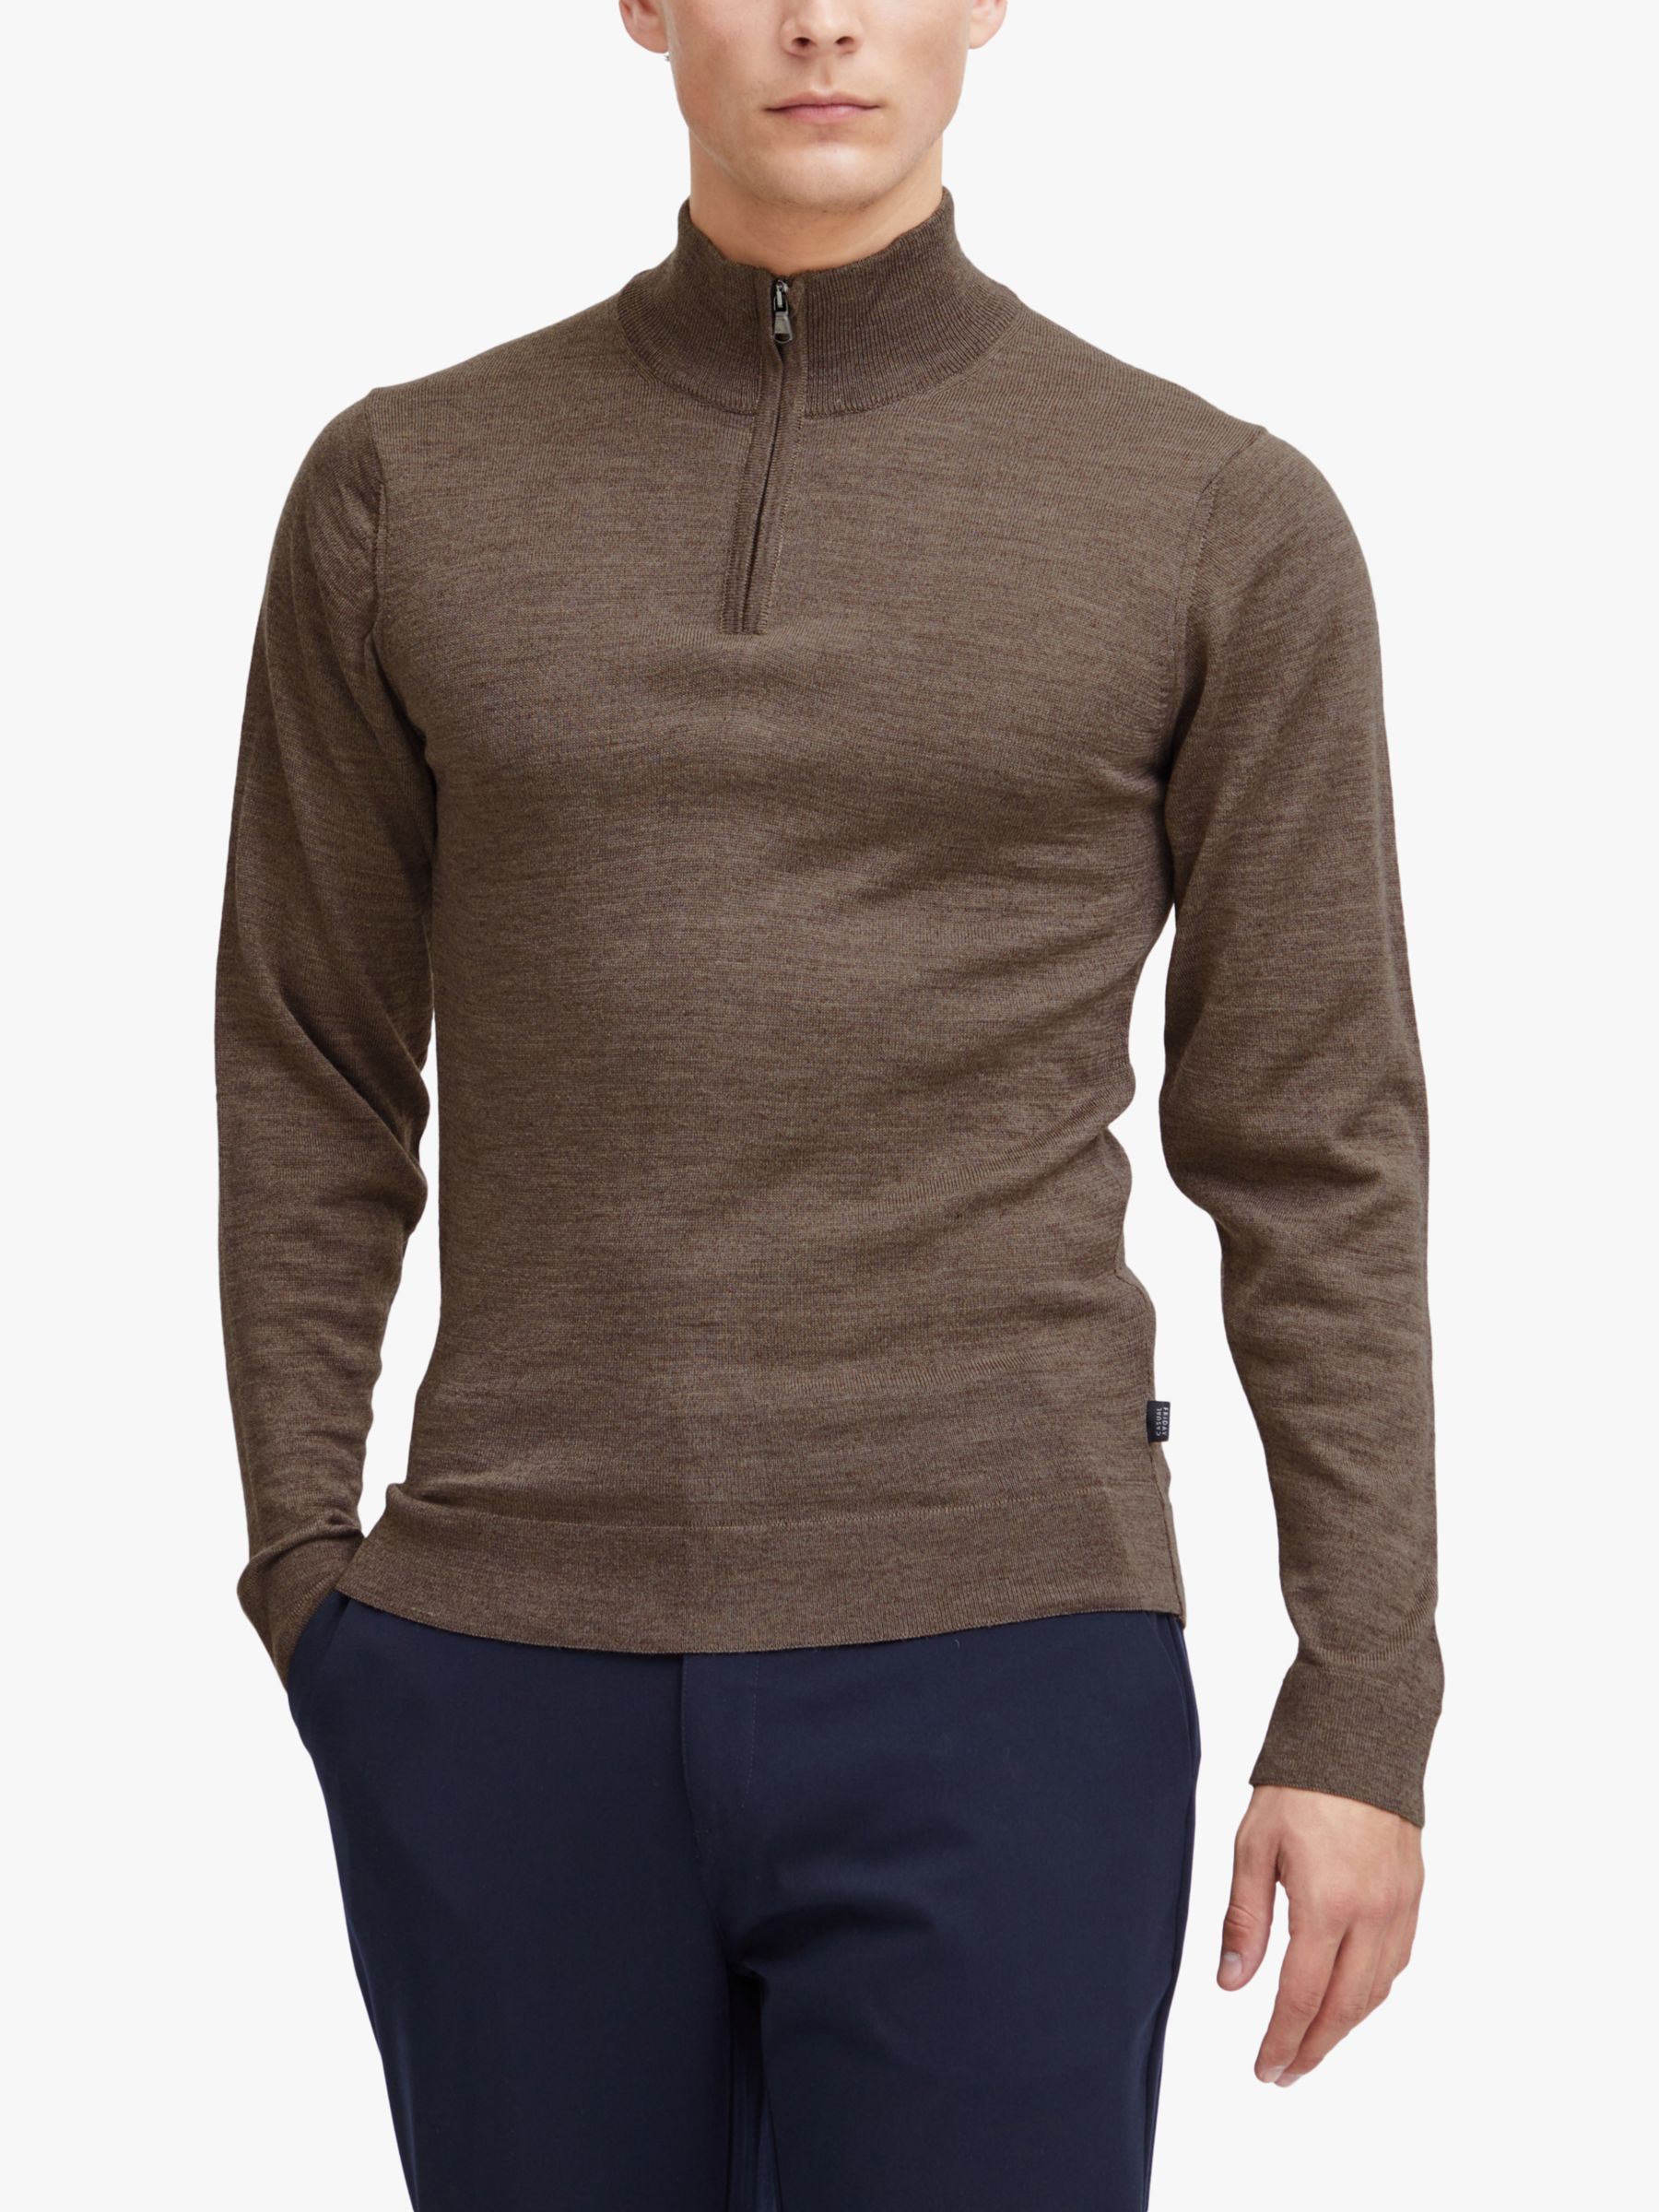 Casual Friday Karlo Long Sleeve Knitted Zip Jumper, Brown, S